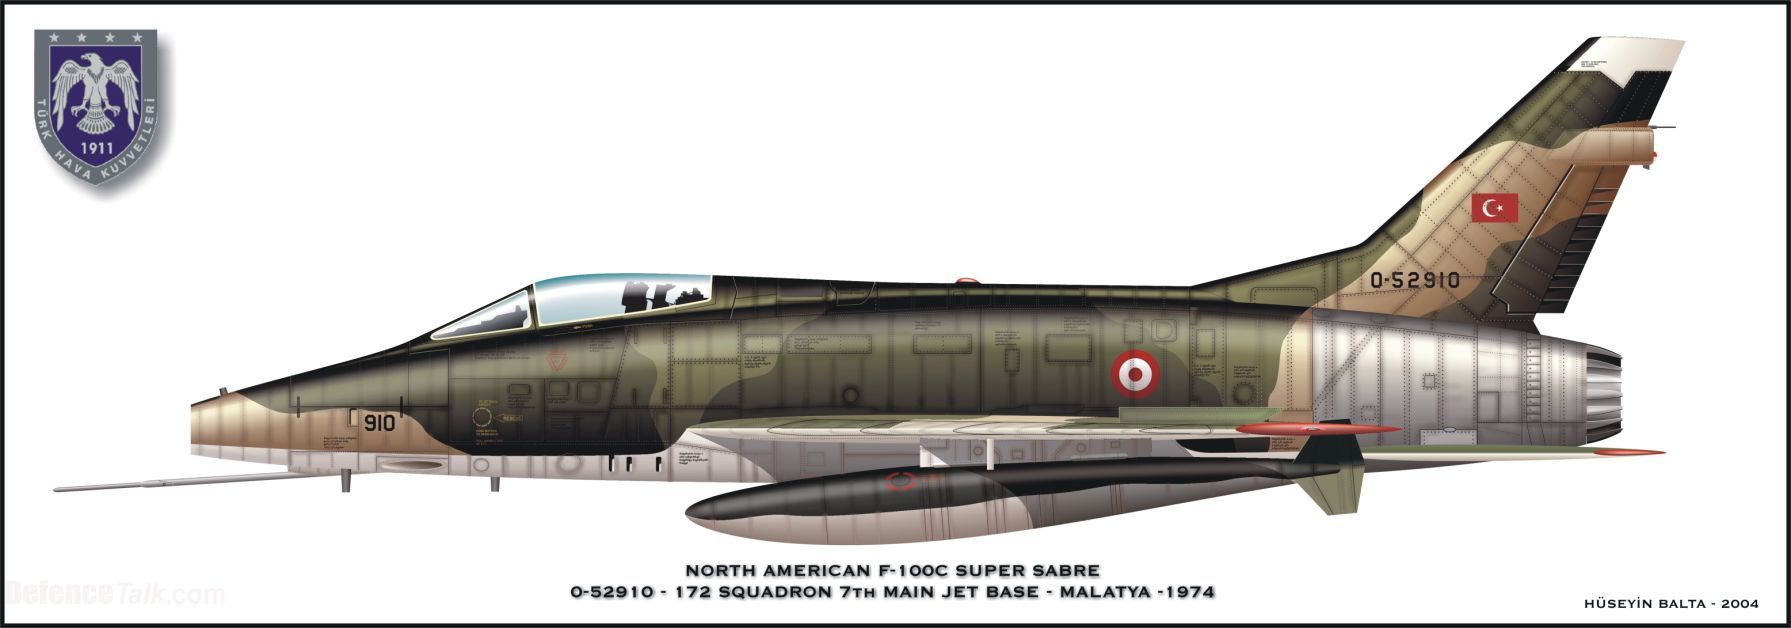 Camouflaged F-100D of Turkish Air Force just prior the Cyprus conflict